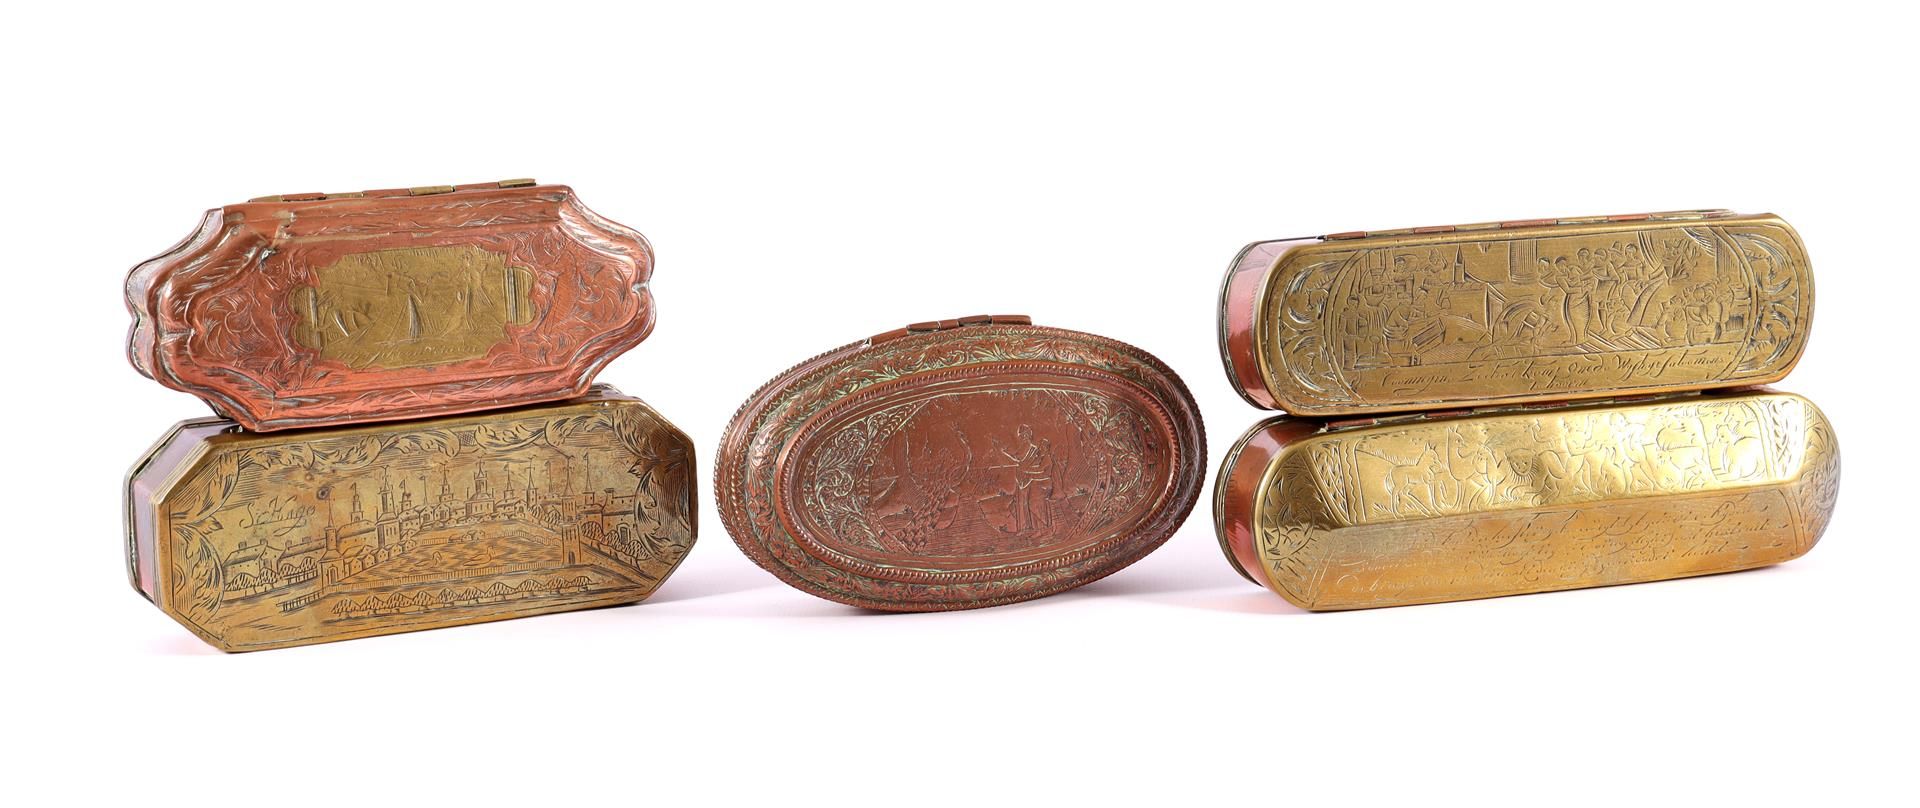 5 copper tobacco boxes with engraved decor